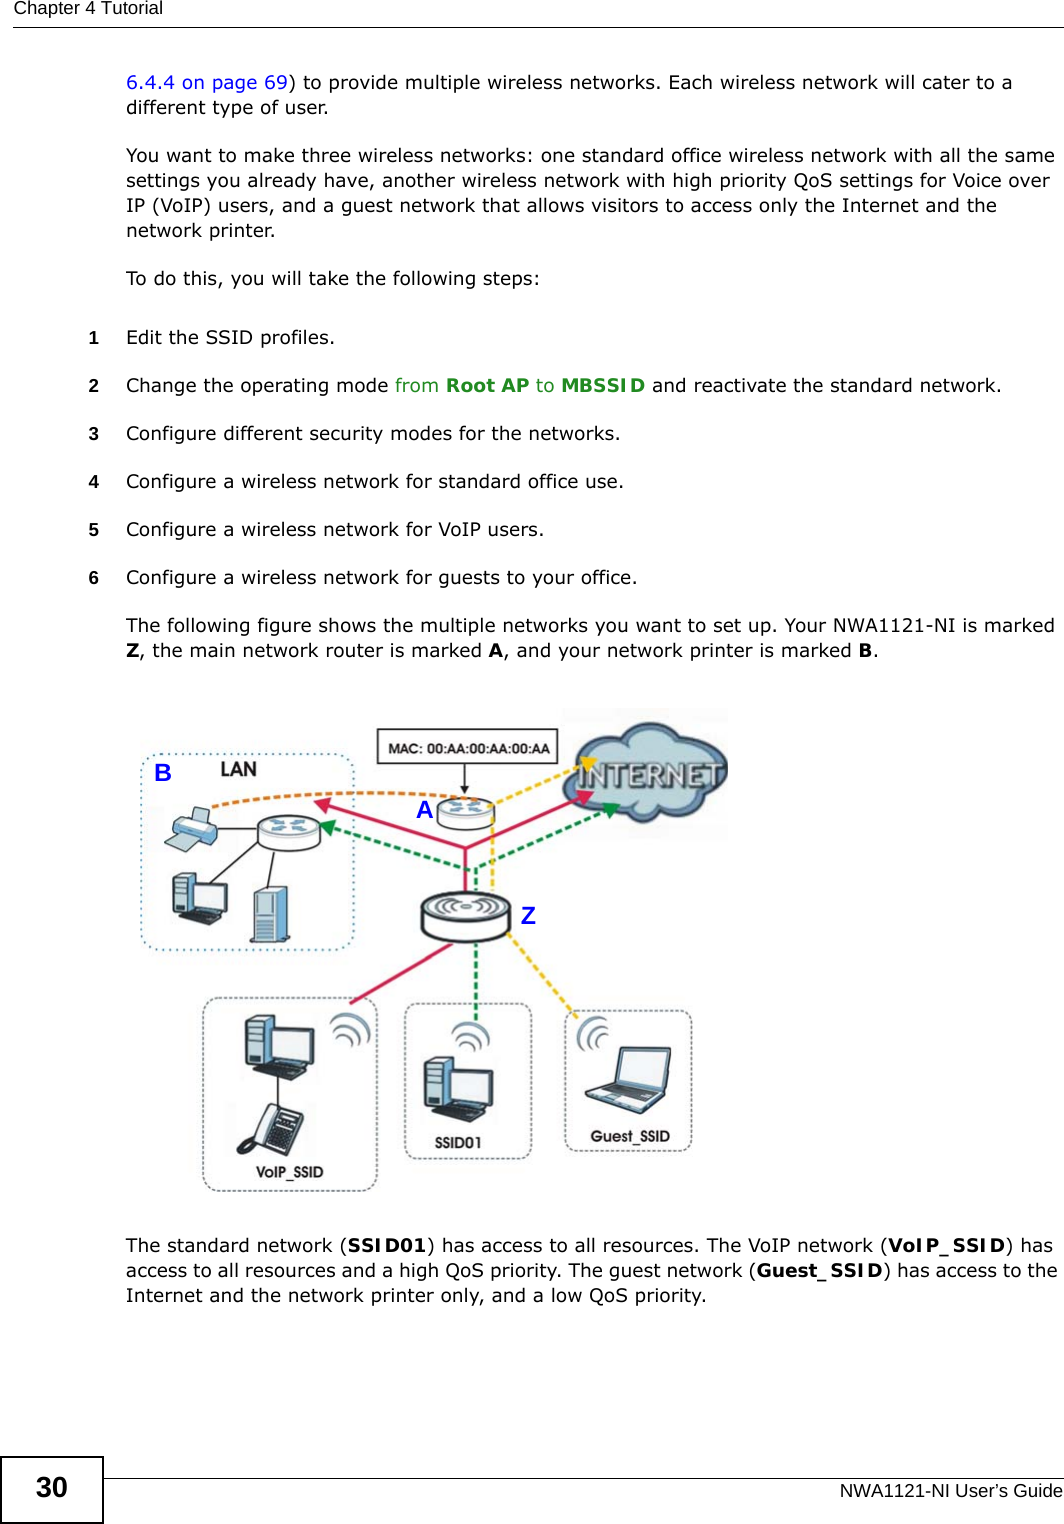 Chapter 4 TutorialNWA1121-NI User’s Guide306.4.4 on page 69) to provide multiple wireless networks. Each wireless network will cater to a different type of user.You want to make three wireless networks: one standard office wireless network with all the same settings you already have, another wireless network with high priority QoS settings for Voice over IP (VoIP) users, and a guest network that allows visitors to access only the Internet and the network printer.To do this, you will take the following steps:1Edit the SSID profiles.2Change the operating mode from Root AP to MBSSID and reactivate the standard network.3Configure different security modes for the networks.4Configure a wireless network for standard office use.5Configure a wireless network for VoIP users.6Configure a wireless network for guests to your office.The following figure shows the multiple networks you want to set up. Your NWA1121-NI is marked Z, the main network router is marked A, and your network printer is marked B.The standard network (SSID01) has access to all resources. The VoIP network (VoIP_SSID) has access to all resources and a high QoS priority. The guest network (Guest_SSID) has access to the Internet and the network printer only, and a low QoS priority.ZAB